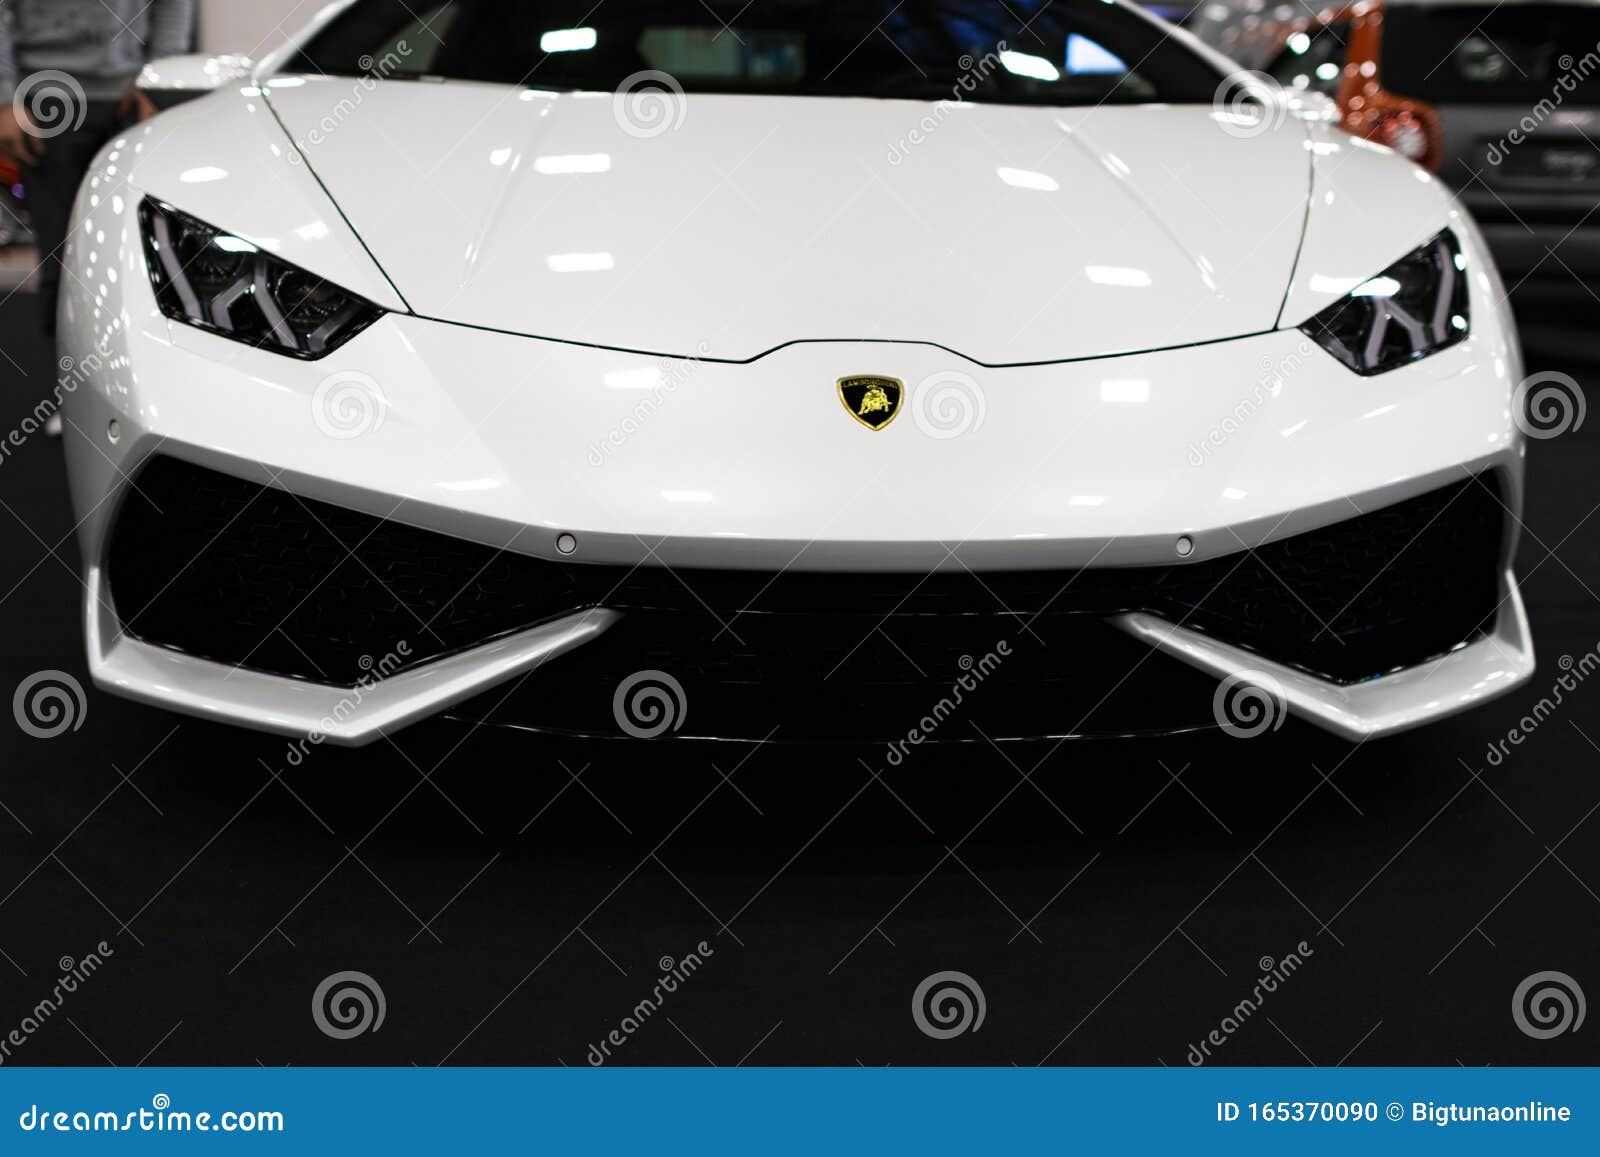 Front View of a White Luxury Sportcar Lamborghini Huracan LP 610-4. Car  Exterior Details Editorial Image - Image of industry, editorial: 165370090